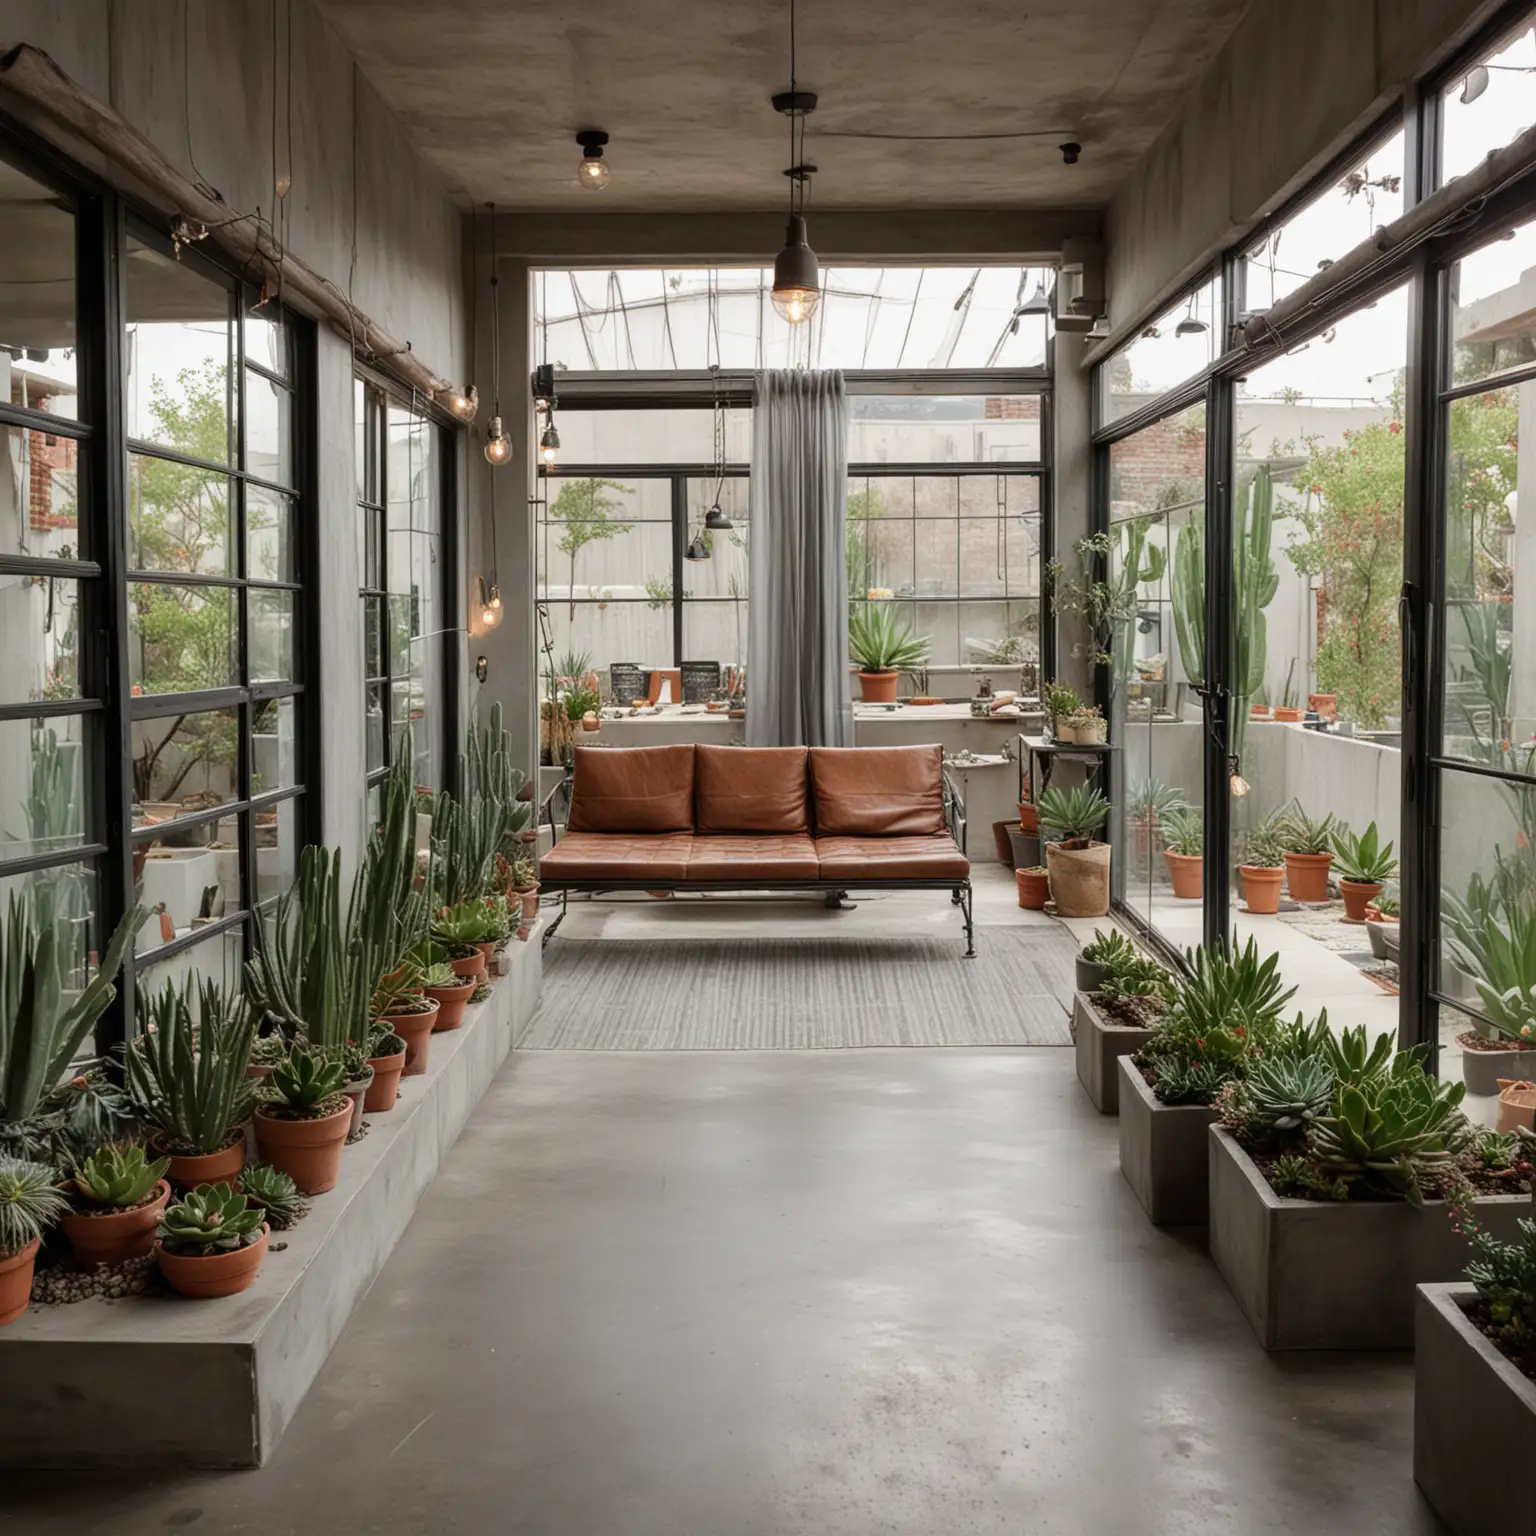 A wide shot of industrial balcony with concrete flooring and metal railings. The space is furnished with a metal bench with leather cushions, a reclaimed wood coffee table, and an industrial-style outdoor lamp. Potted succulents and cacti in concrete planters add greenery. Exposed bulb string lights hang overhead, and large sliding glass doors with sheer gray curtains provide access to the interior.